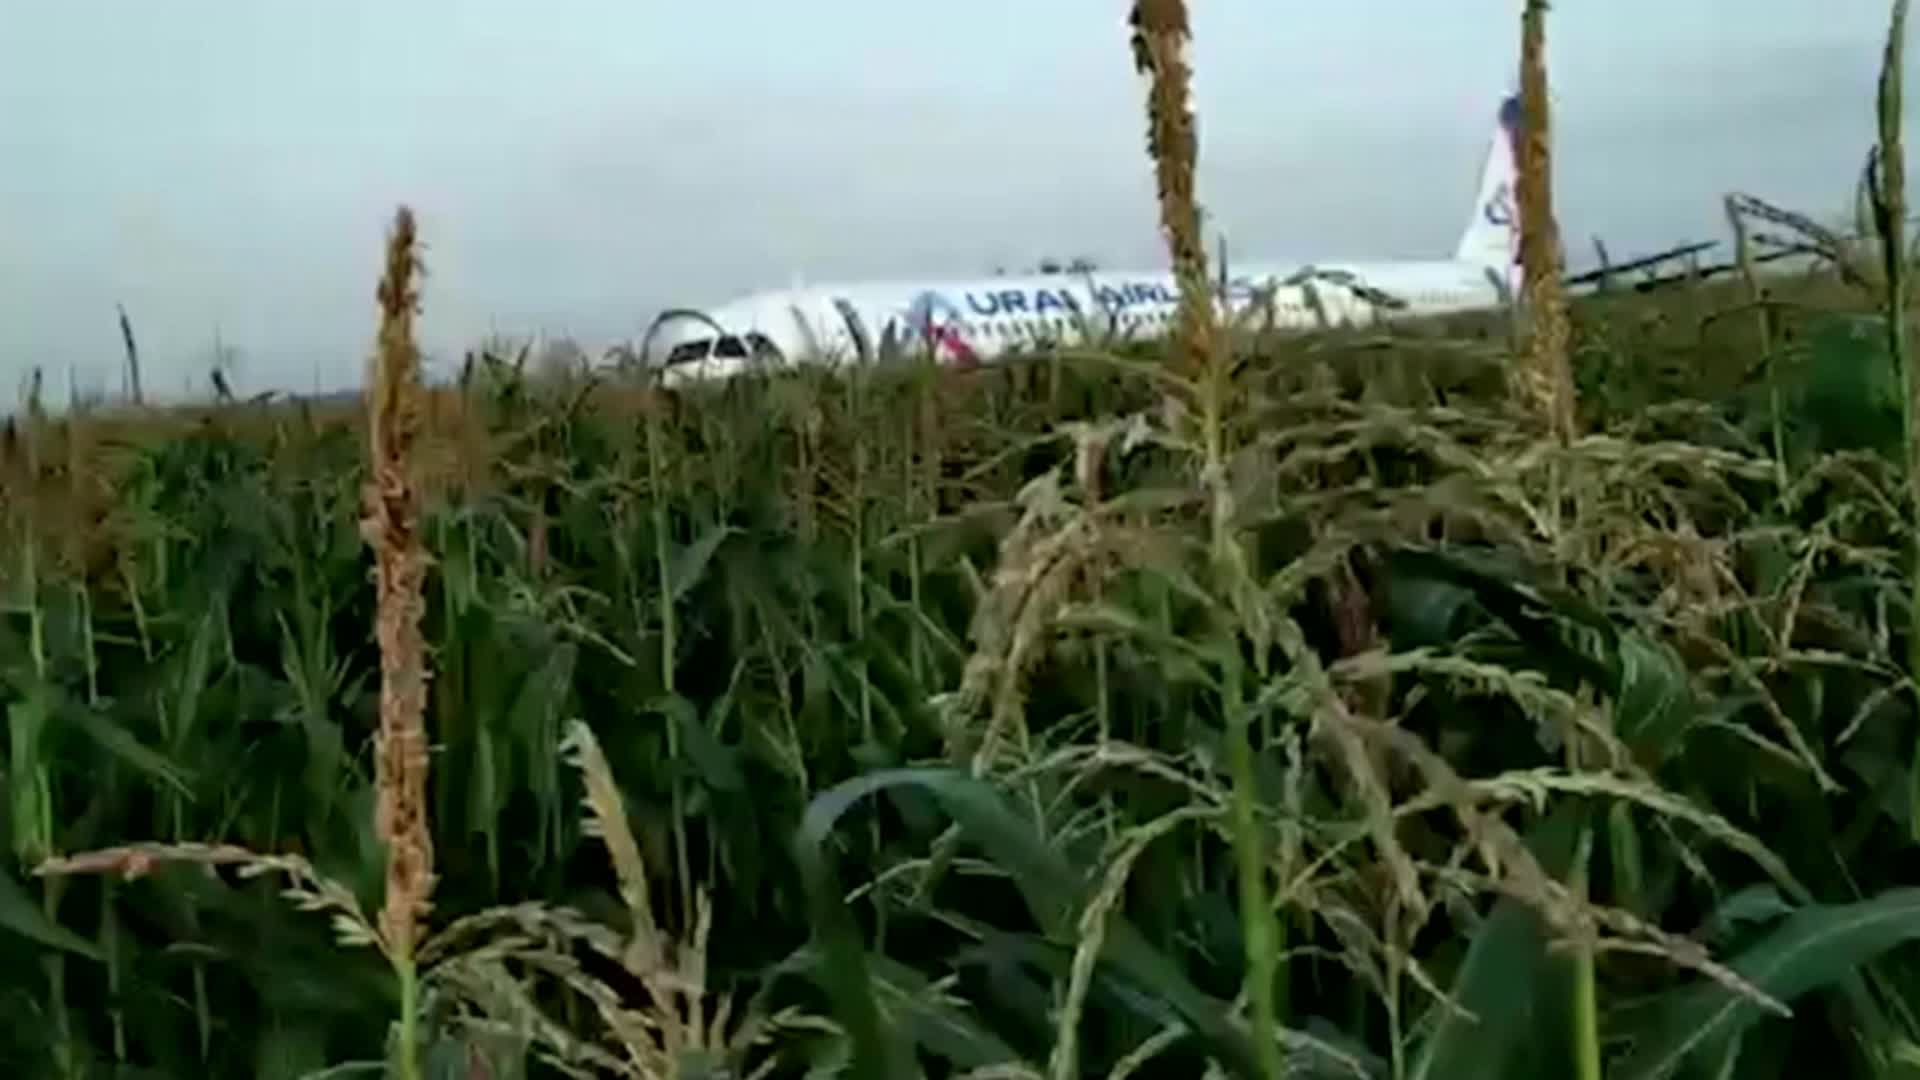 A Russian airliner was attacked by birds and its twin engines failed to make a successful forcible landing in corn fields.